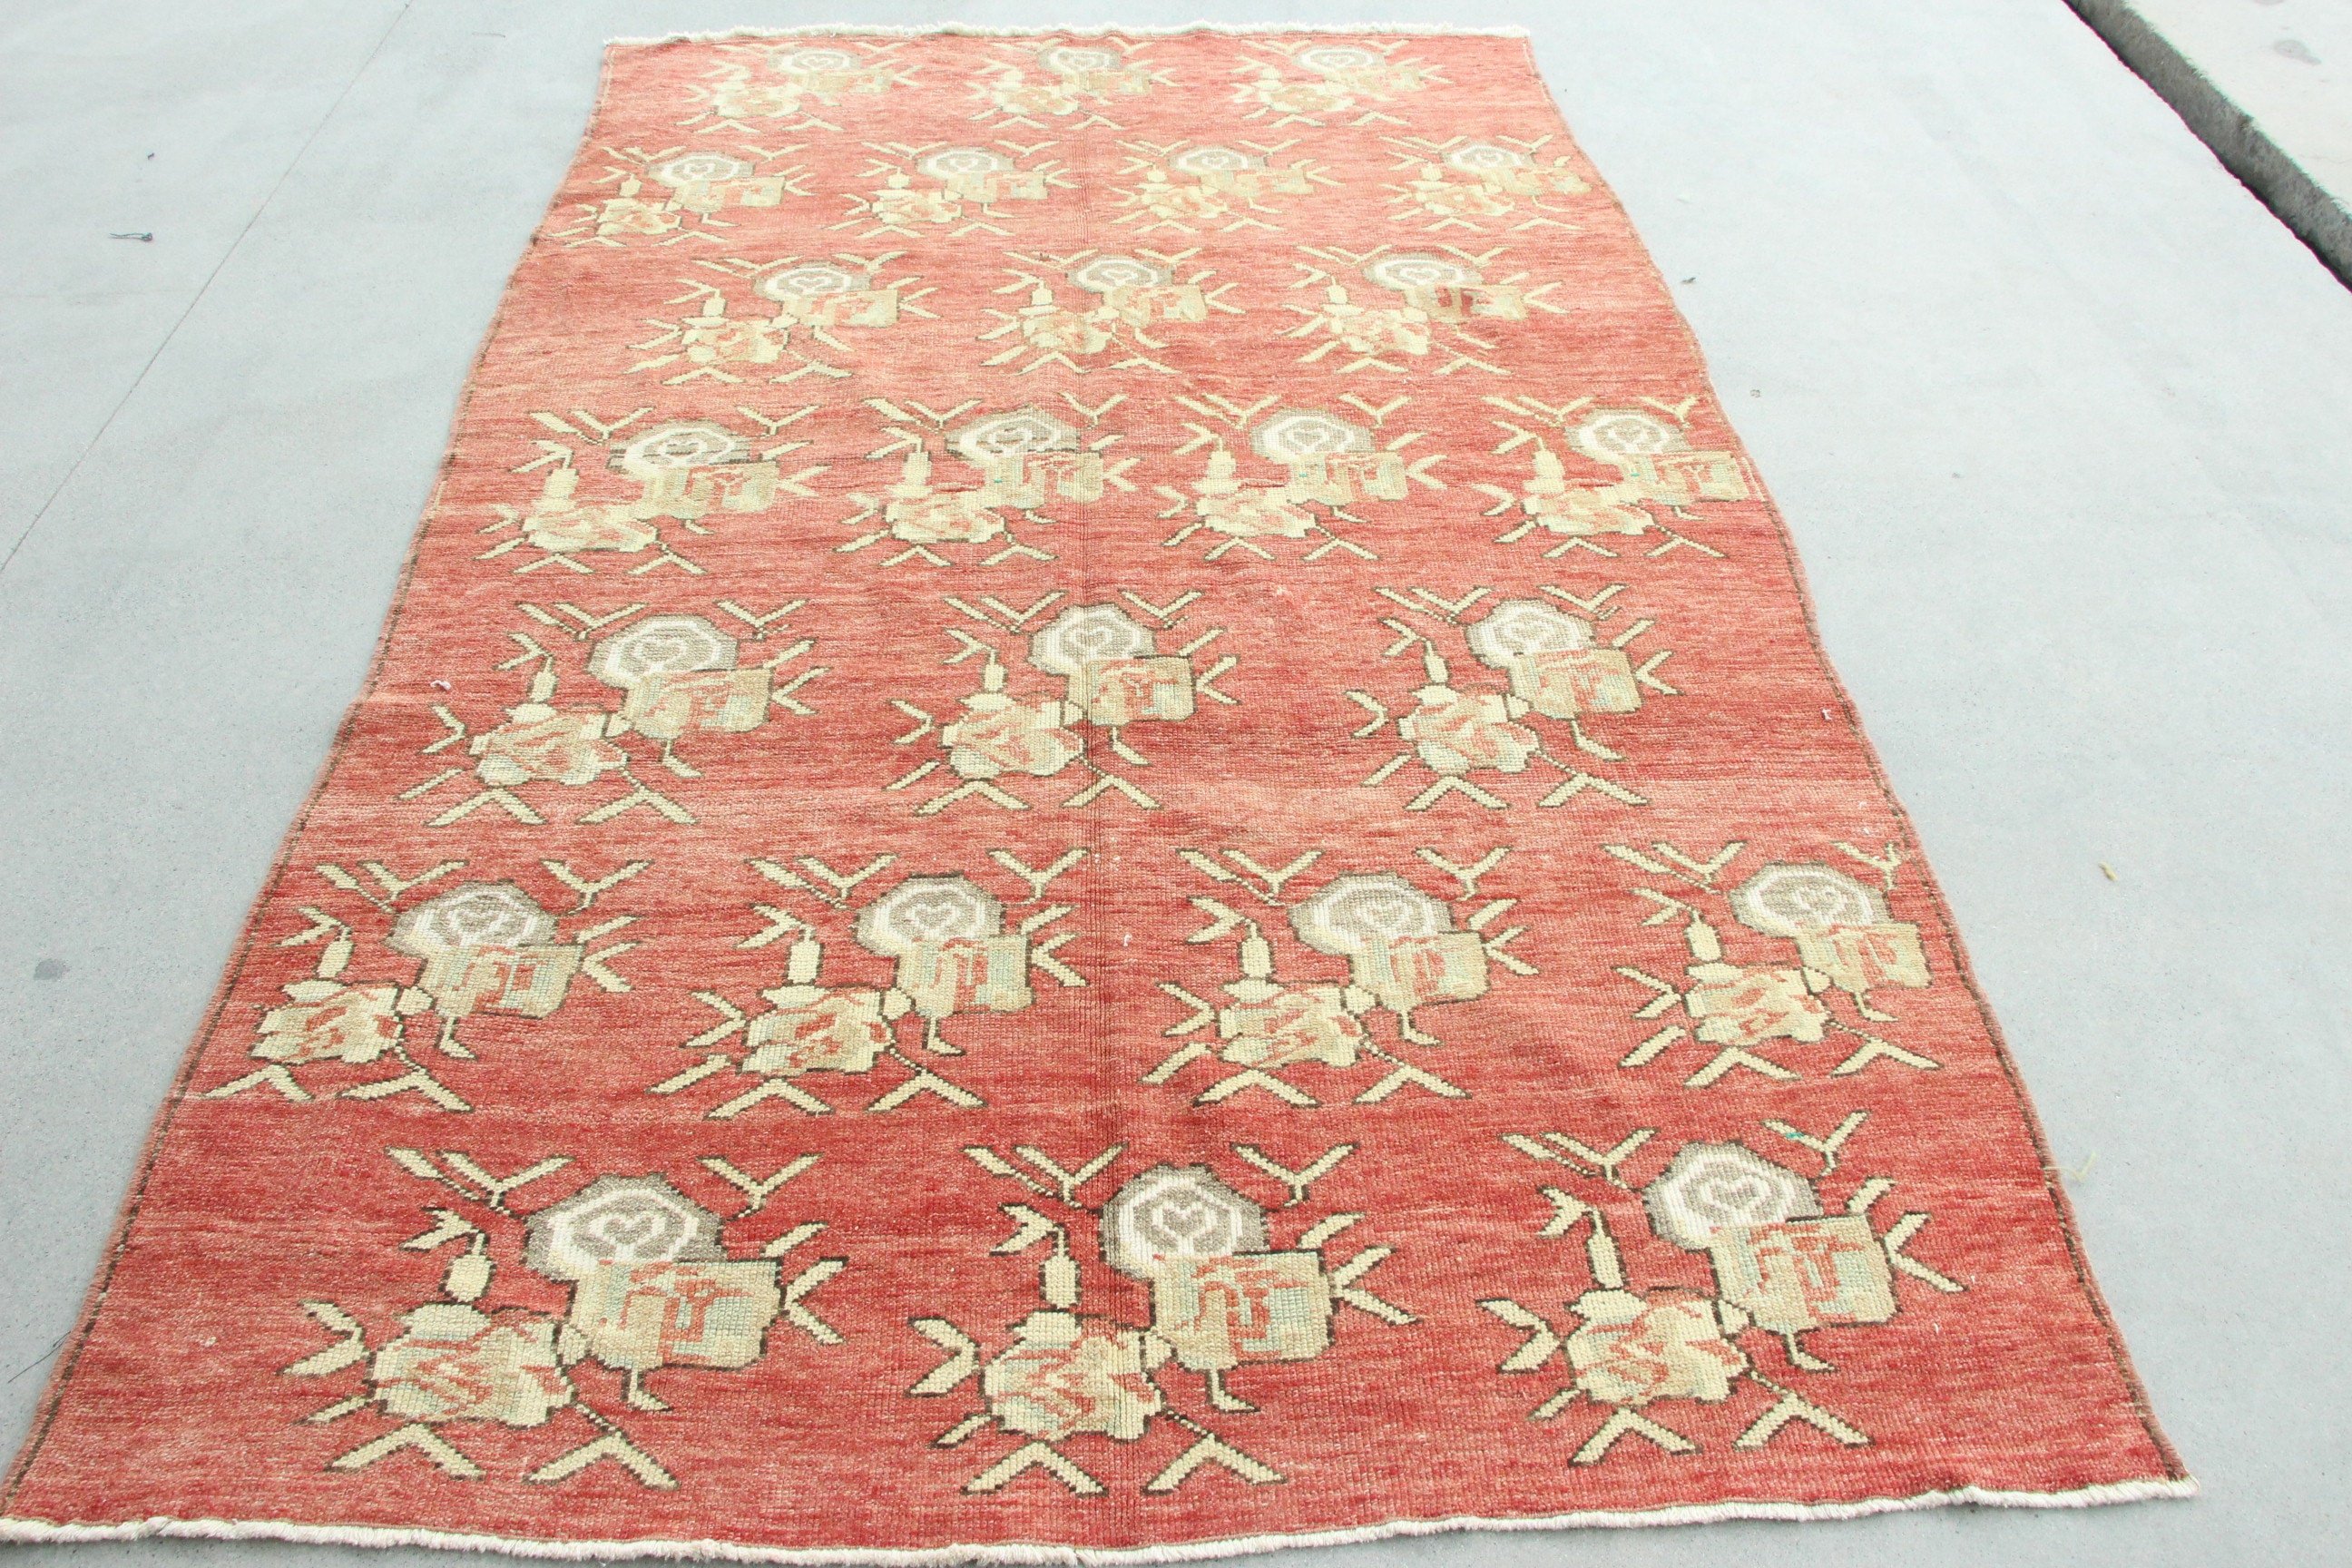 Cool Rugs, Red Kitchen Rugs, Dining Room Rugs, Living Room Rug, Anatolian Rugs, 5.2x8.7 ft Large Rug, Vintage Rug, Turkish Rugs, Pastel Rug